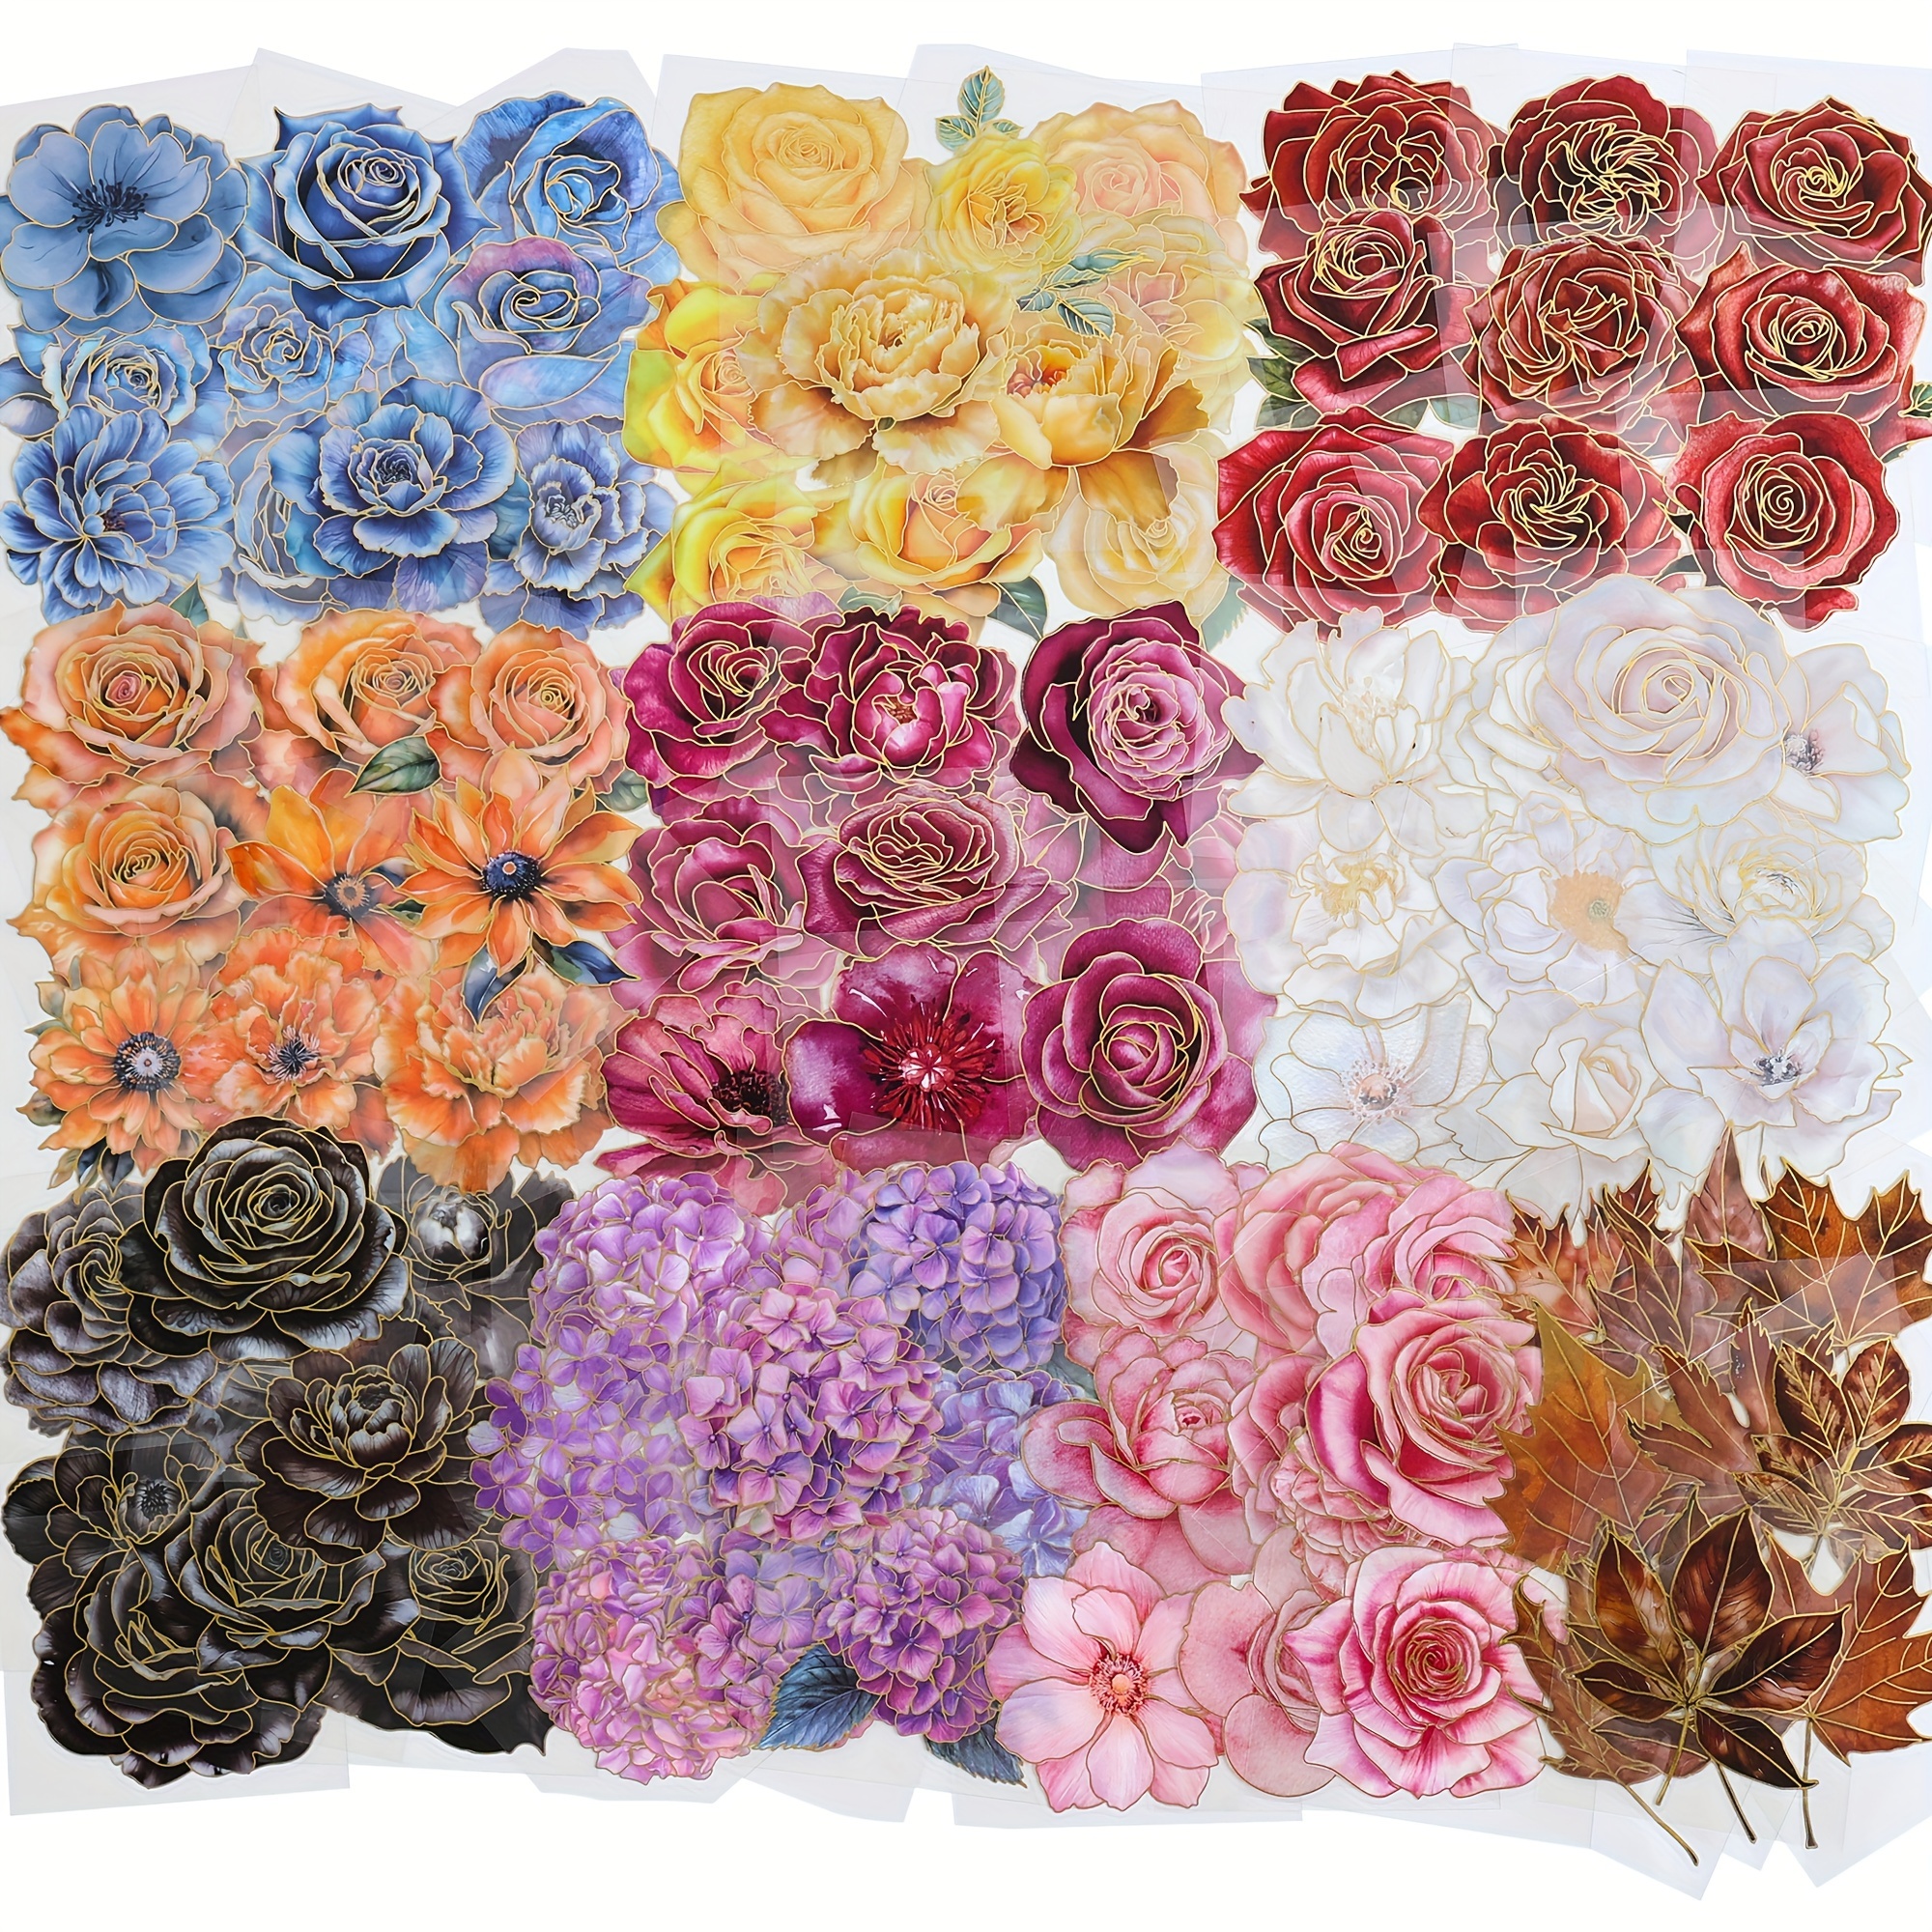 

100 Pcs Large Floral Stickers With Metallic Holographic Edges, Reusable Watercolor Blossoms For Scrapbooking, Journaling & Aesthetic Home Embellishments